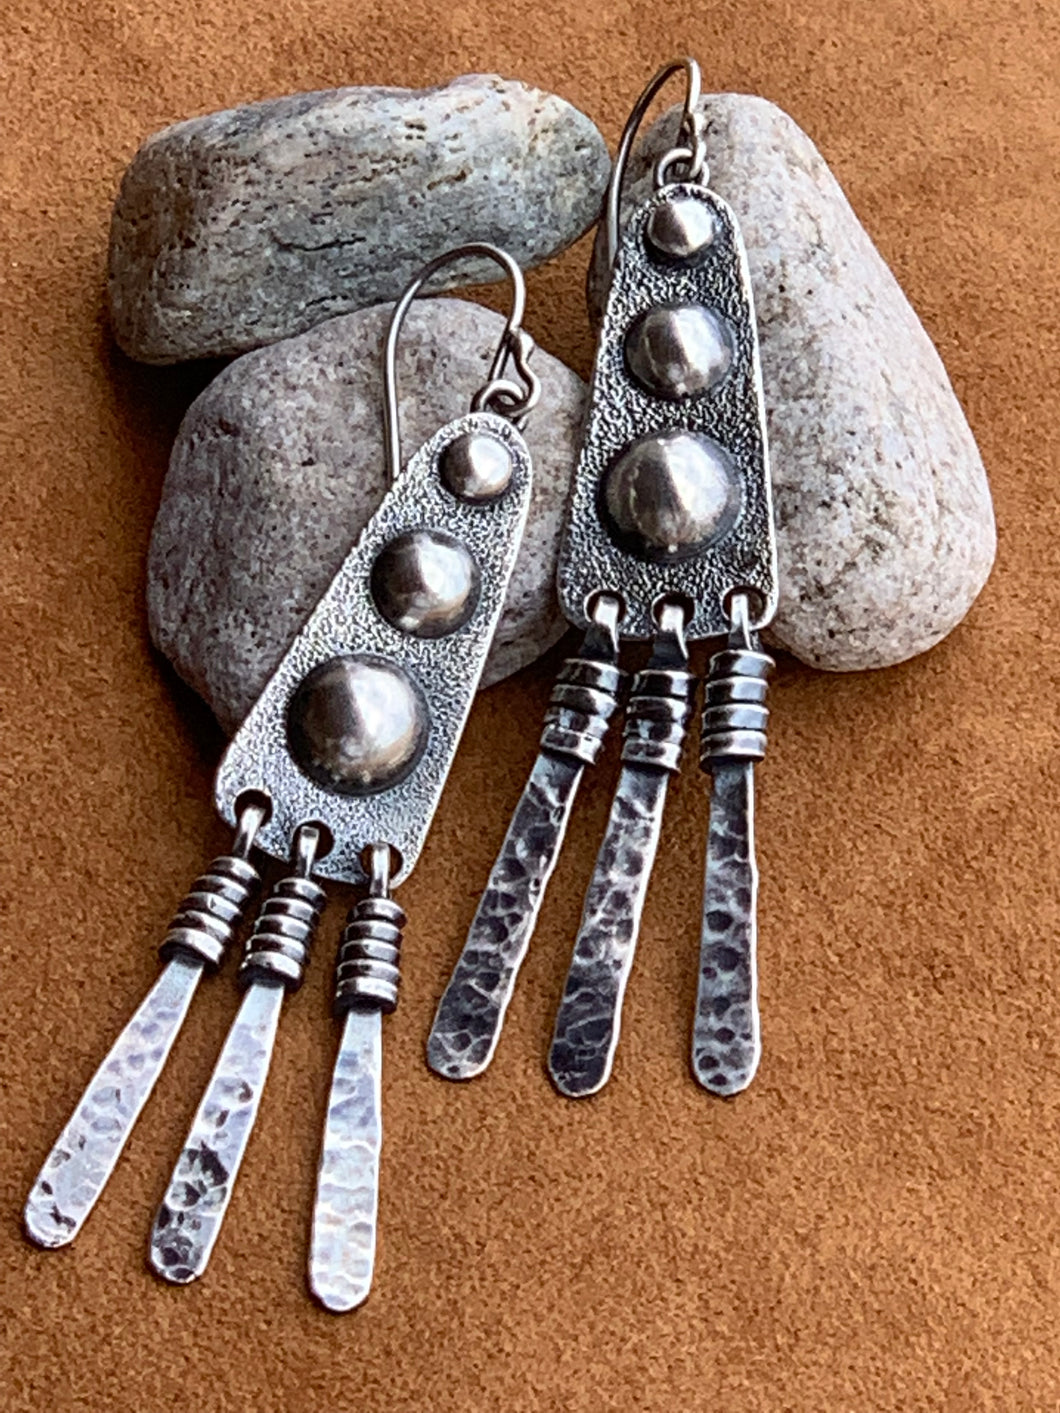 Millicent's Zuni-inspired Earrings by David Anderson of Taos